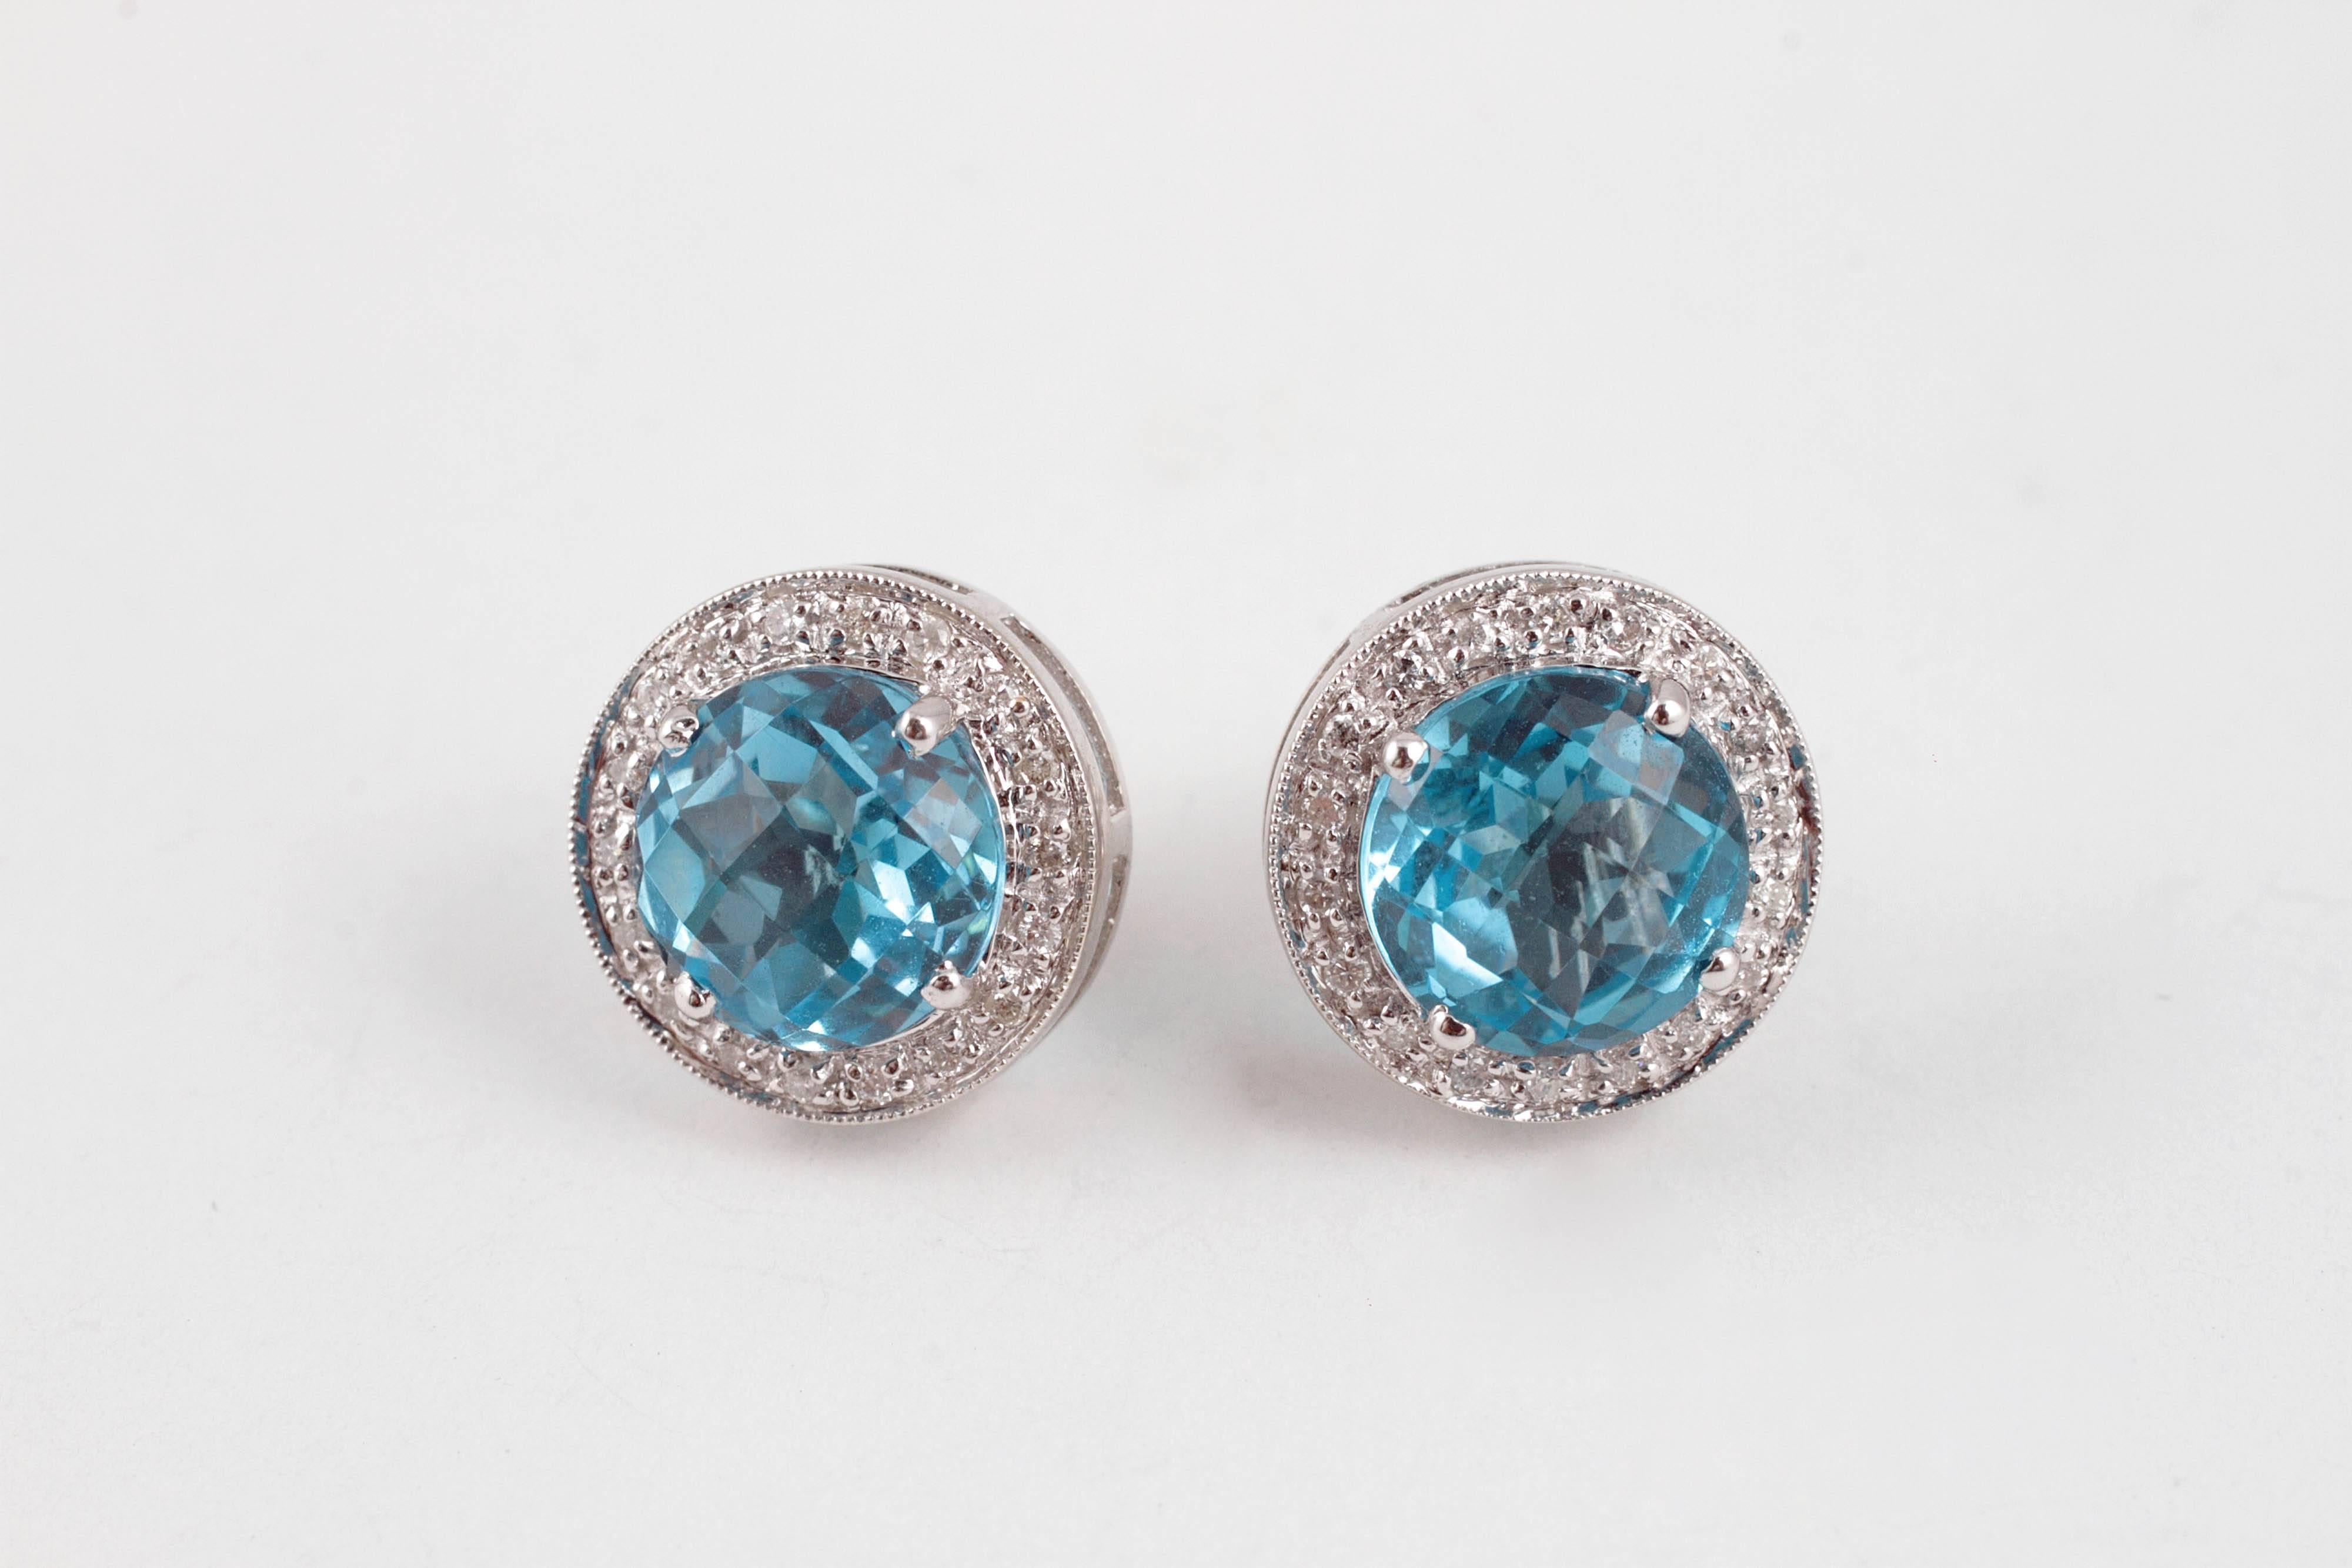 What a pop of color!  Bright blue, round topaz stones surrounded by a row of diamonds, all set in 14 karat white gold, with standard friction backs.  